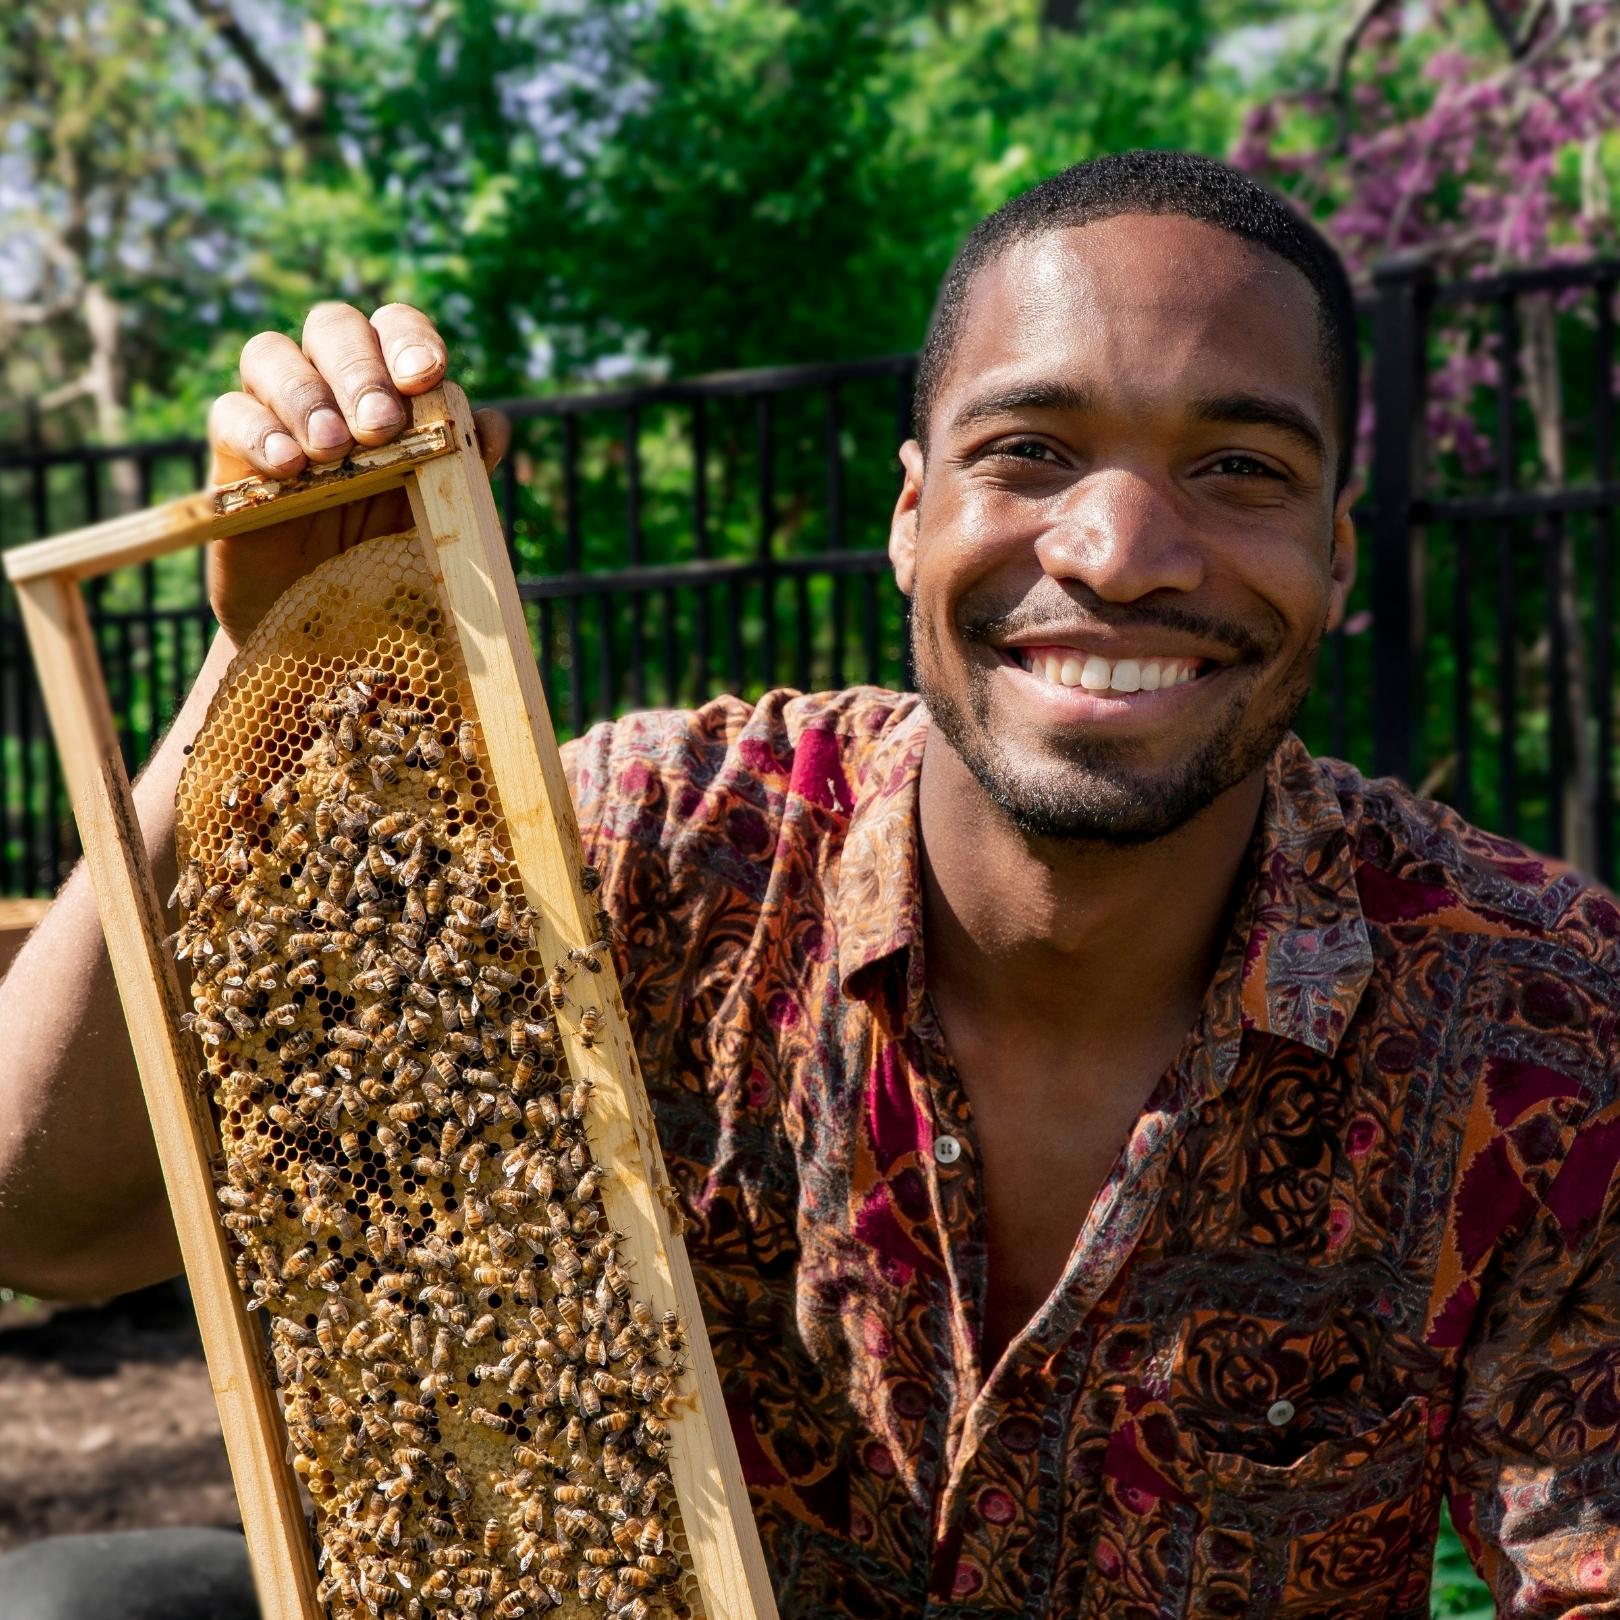 A picture of a black man, Brandon Reynolds, holding a rectangular bee hive.